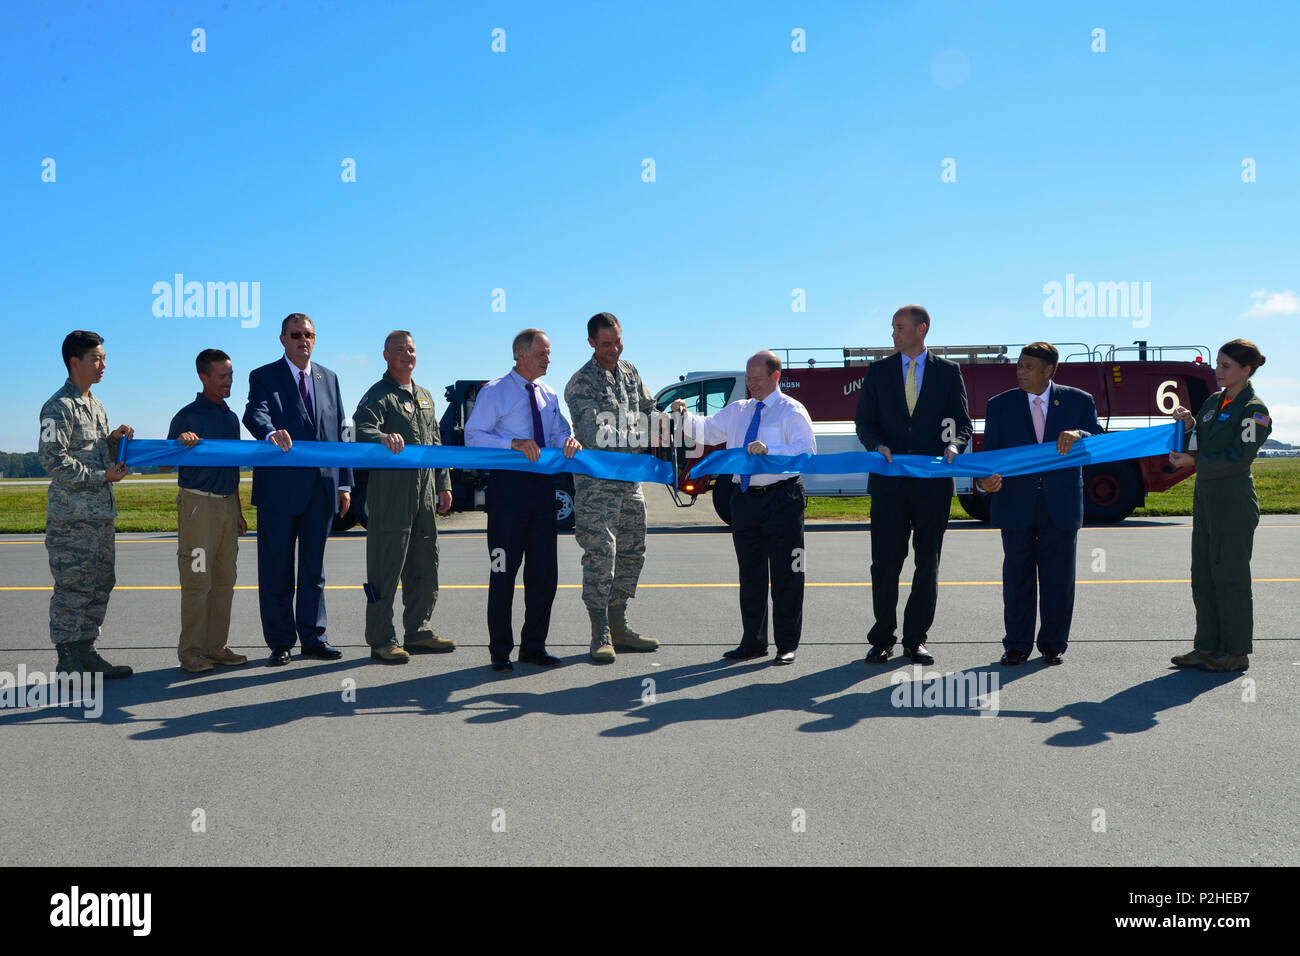 Col. Ethan Griffin, 436th Airlift Wing commander, and Sen. Chris Coons, D-Del.; cut a ribbon marking the reopening Runway 01-19 during an extensive reconstruction project Sept. 23, 2016, at Dover Air Force Base, Del. Shown from left, Airman 1st Class Joseph Cho, 436th Aircraft Maintenance Squadron; Tony Price, sub-contractor representative; Jeff Wagonhurst, Versar Inc. president and CEO; Col. Scott Durham, 512th AW commander; Sen. Tom Carper, D-Del.; Col. Ethan Griffin, 436th AW commander; Sen. Chris Coons, D-Del.; Drew Slater, Rep. John Carney D-Del. representative; Robin Christiansen, Mayor  Stock Photo